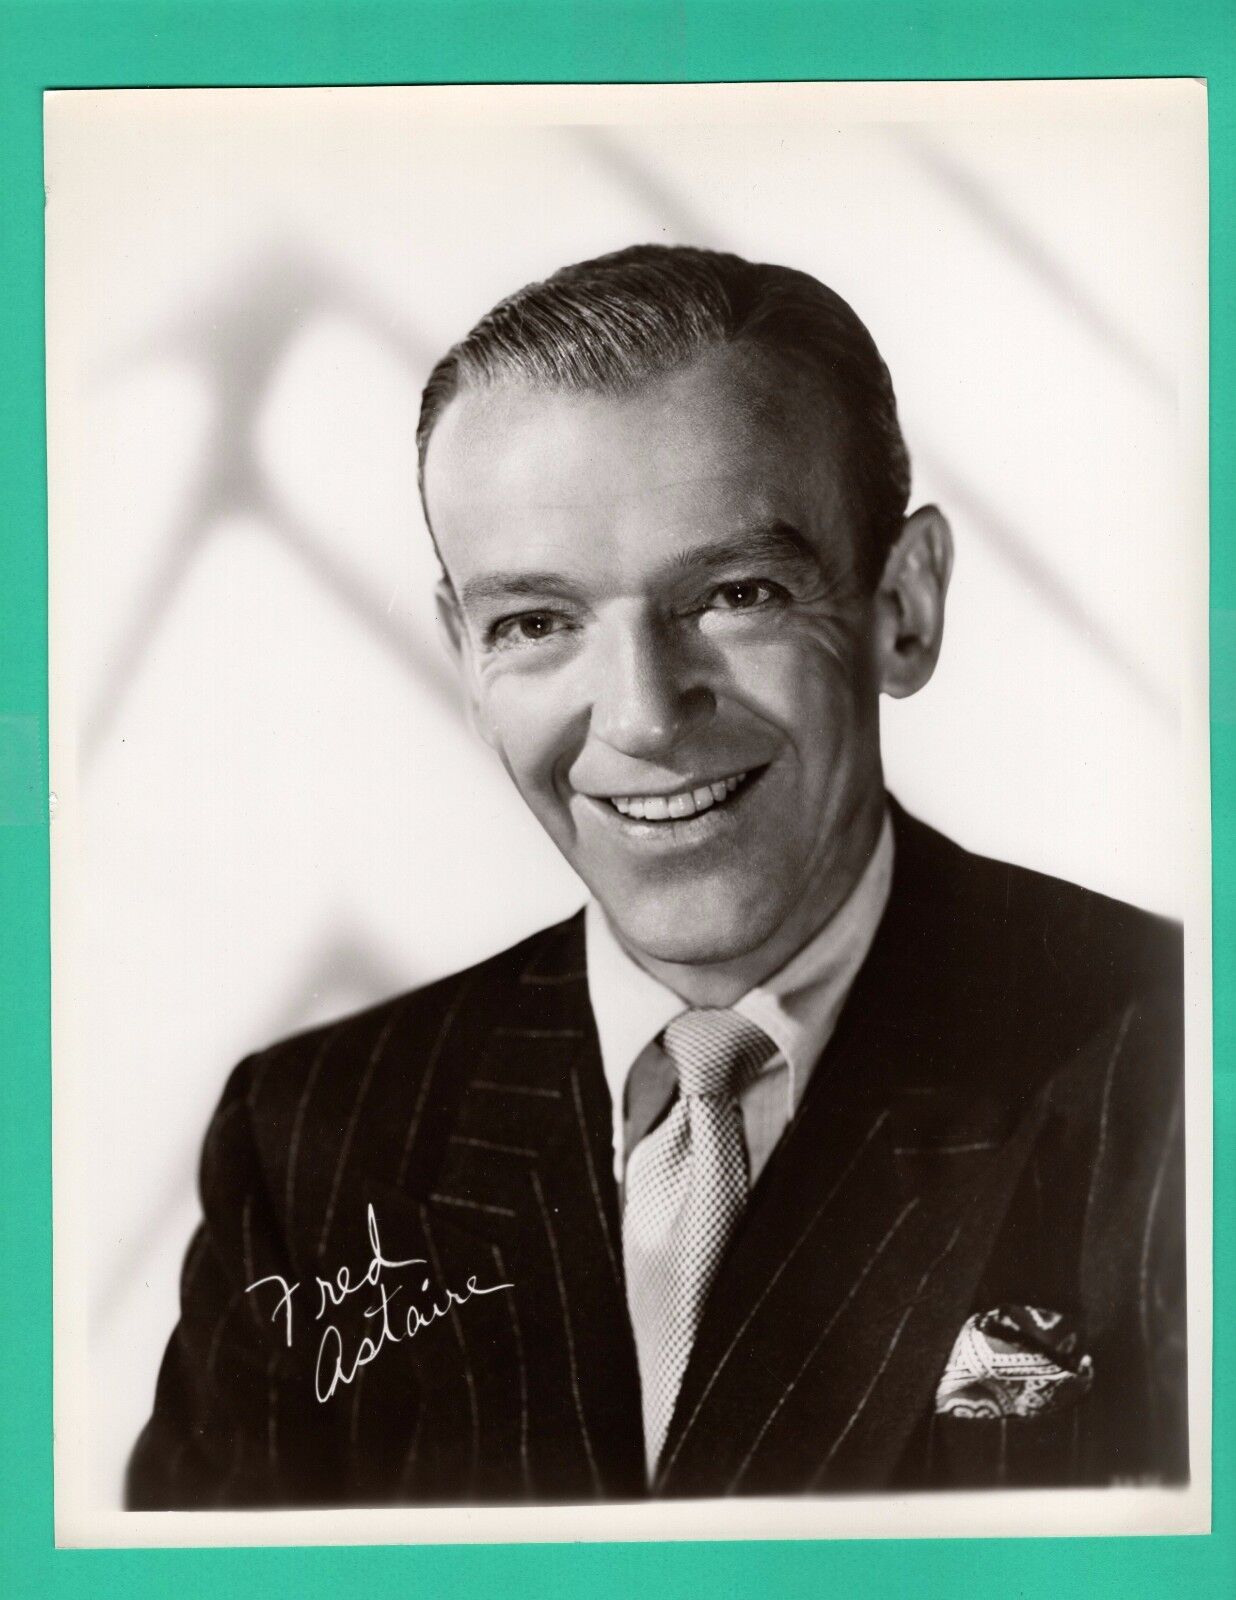 FRED ASTAIRE Movie Star Actor Singer Dancer Promo 1940's Photo Poster painting 8x10